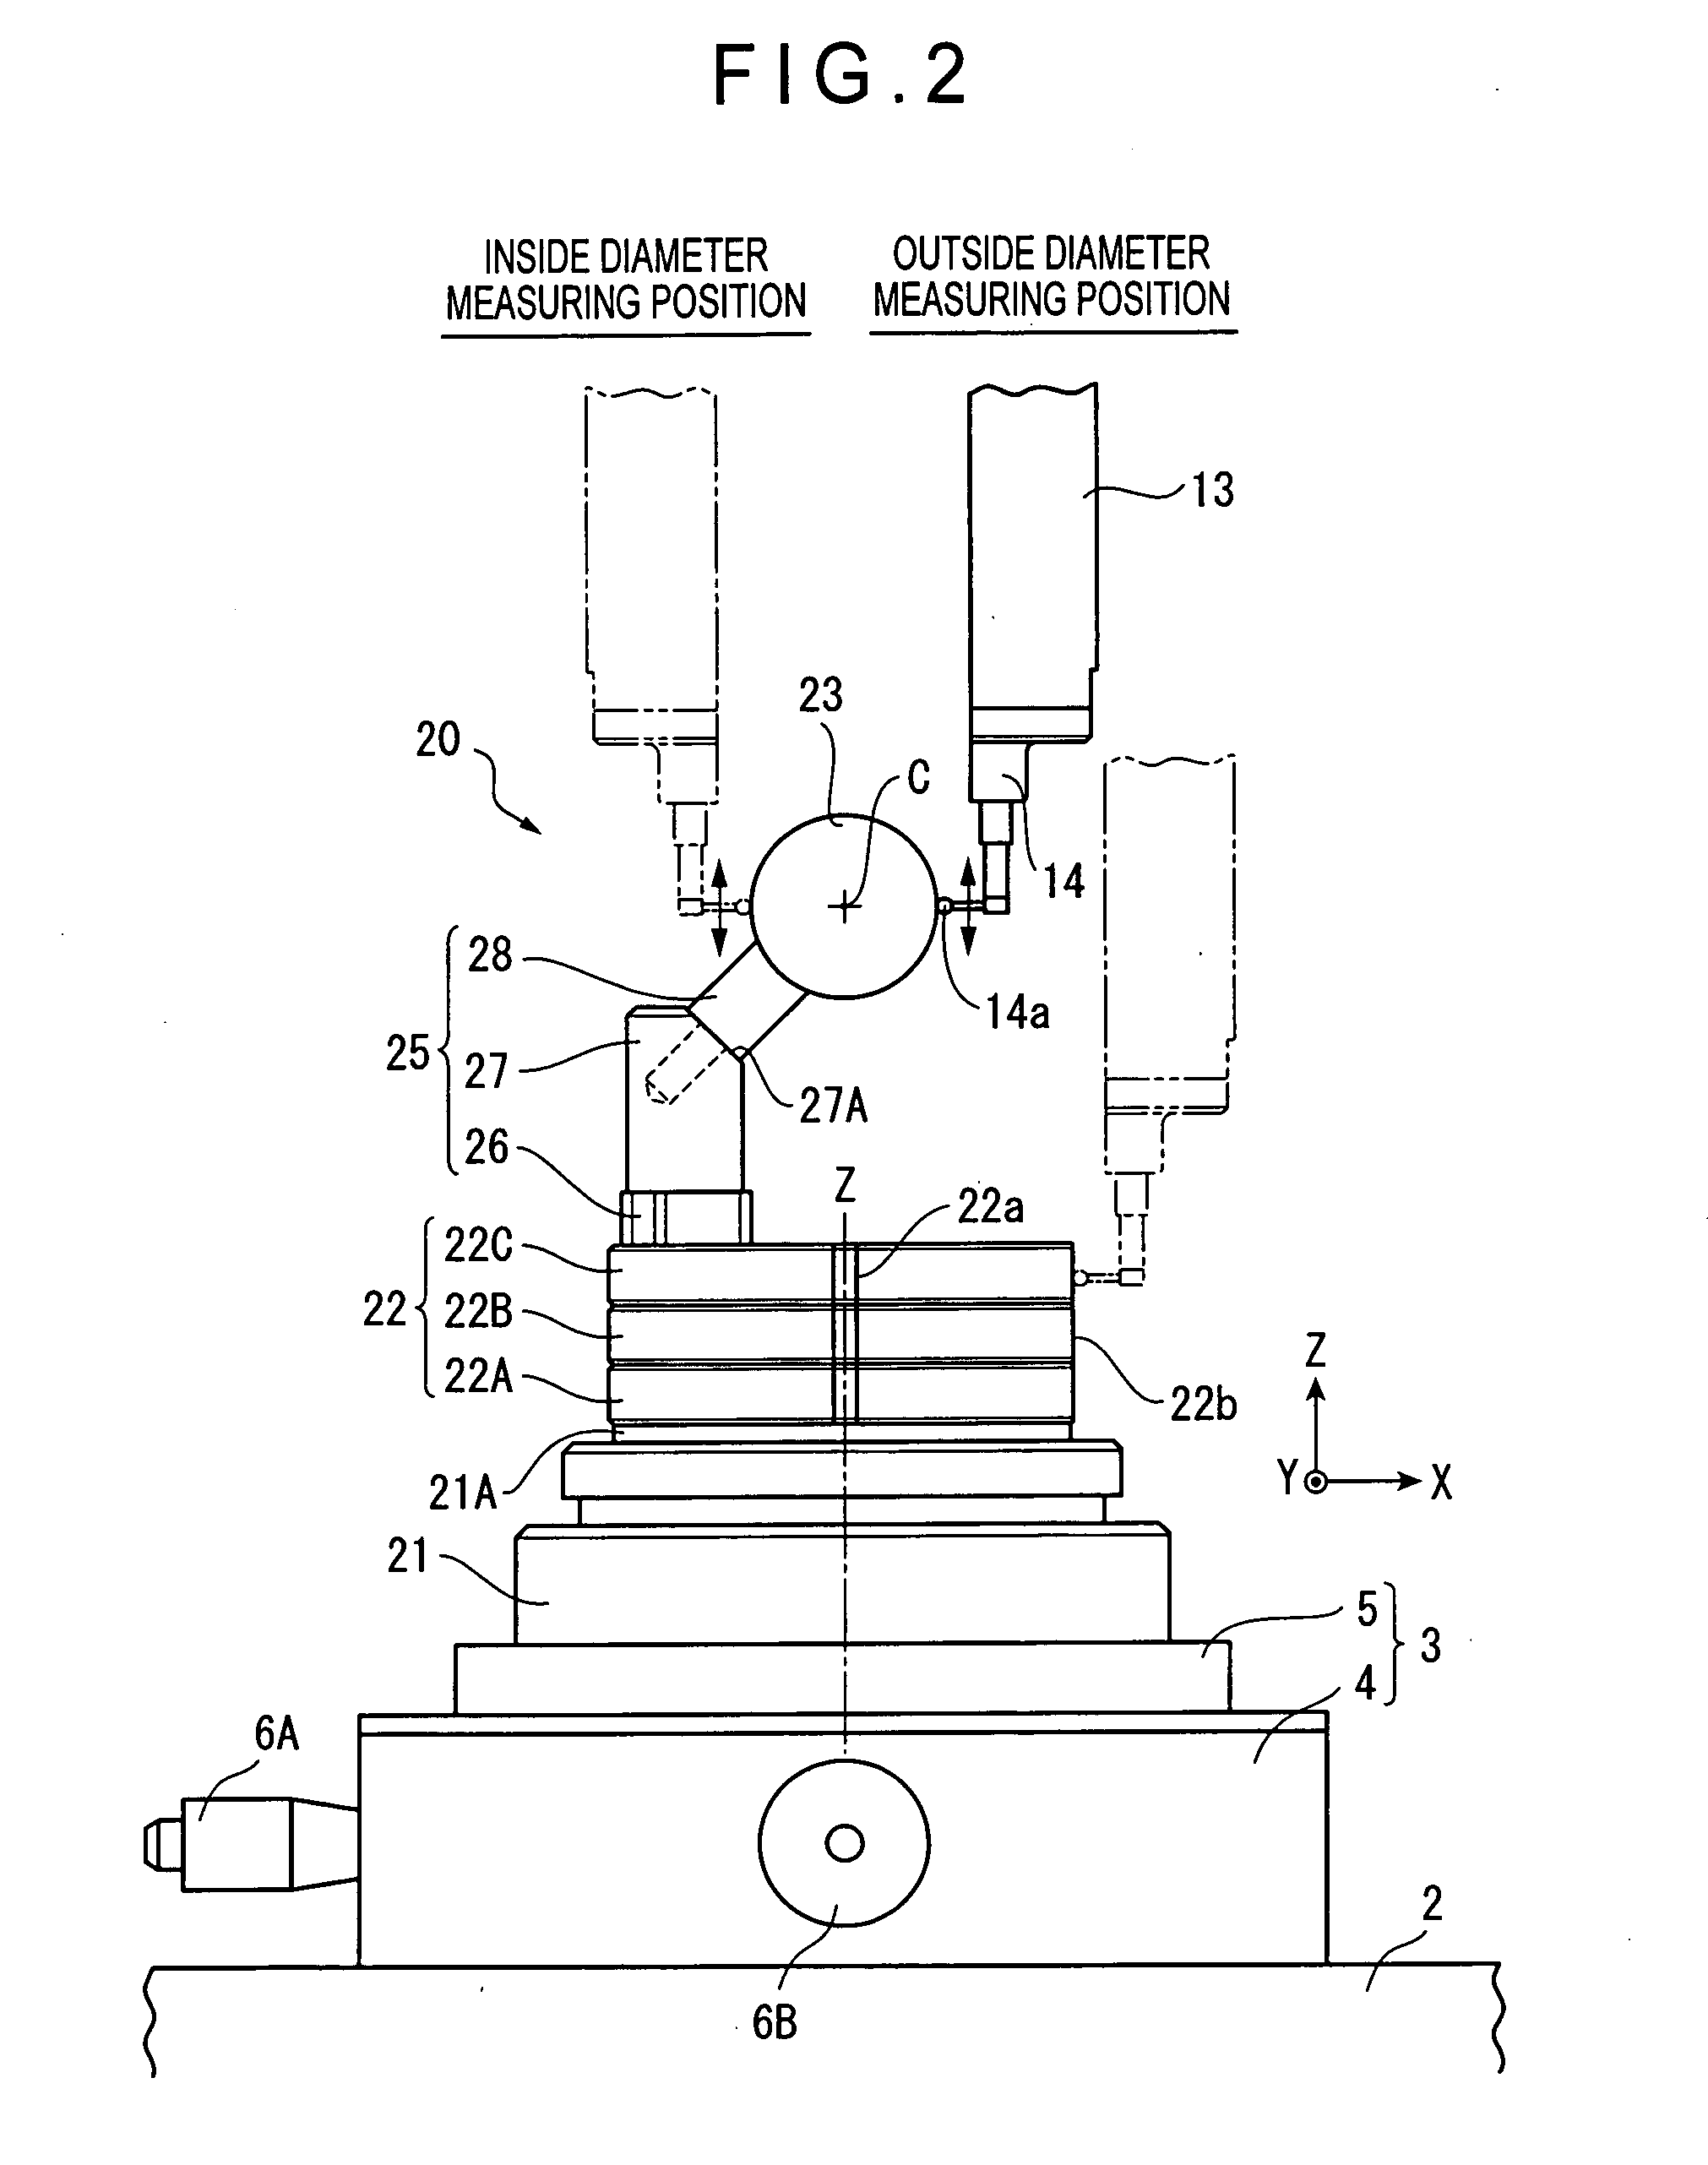 Reference fixture for roundness measuring instrument